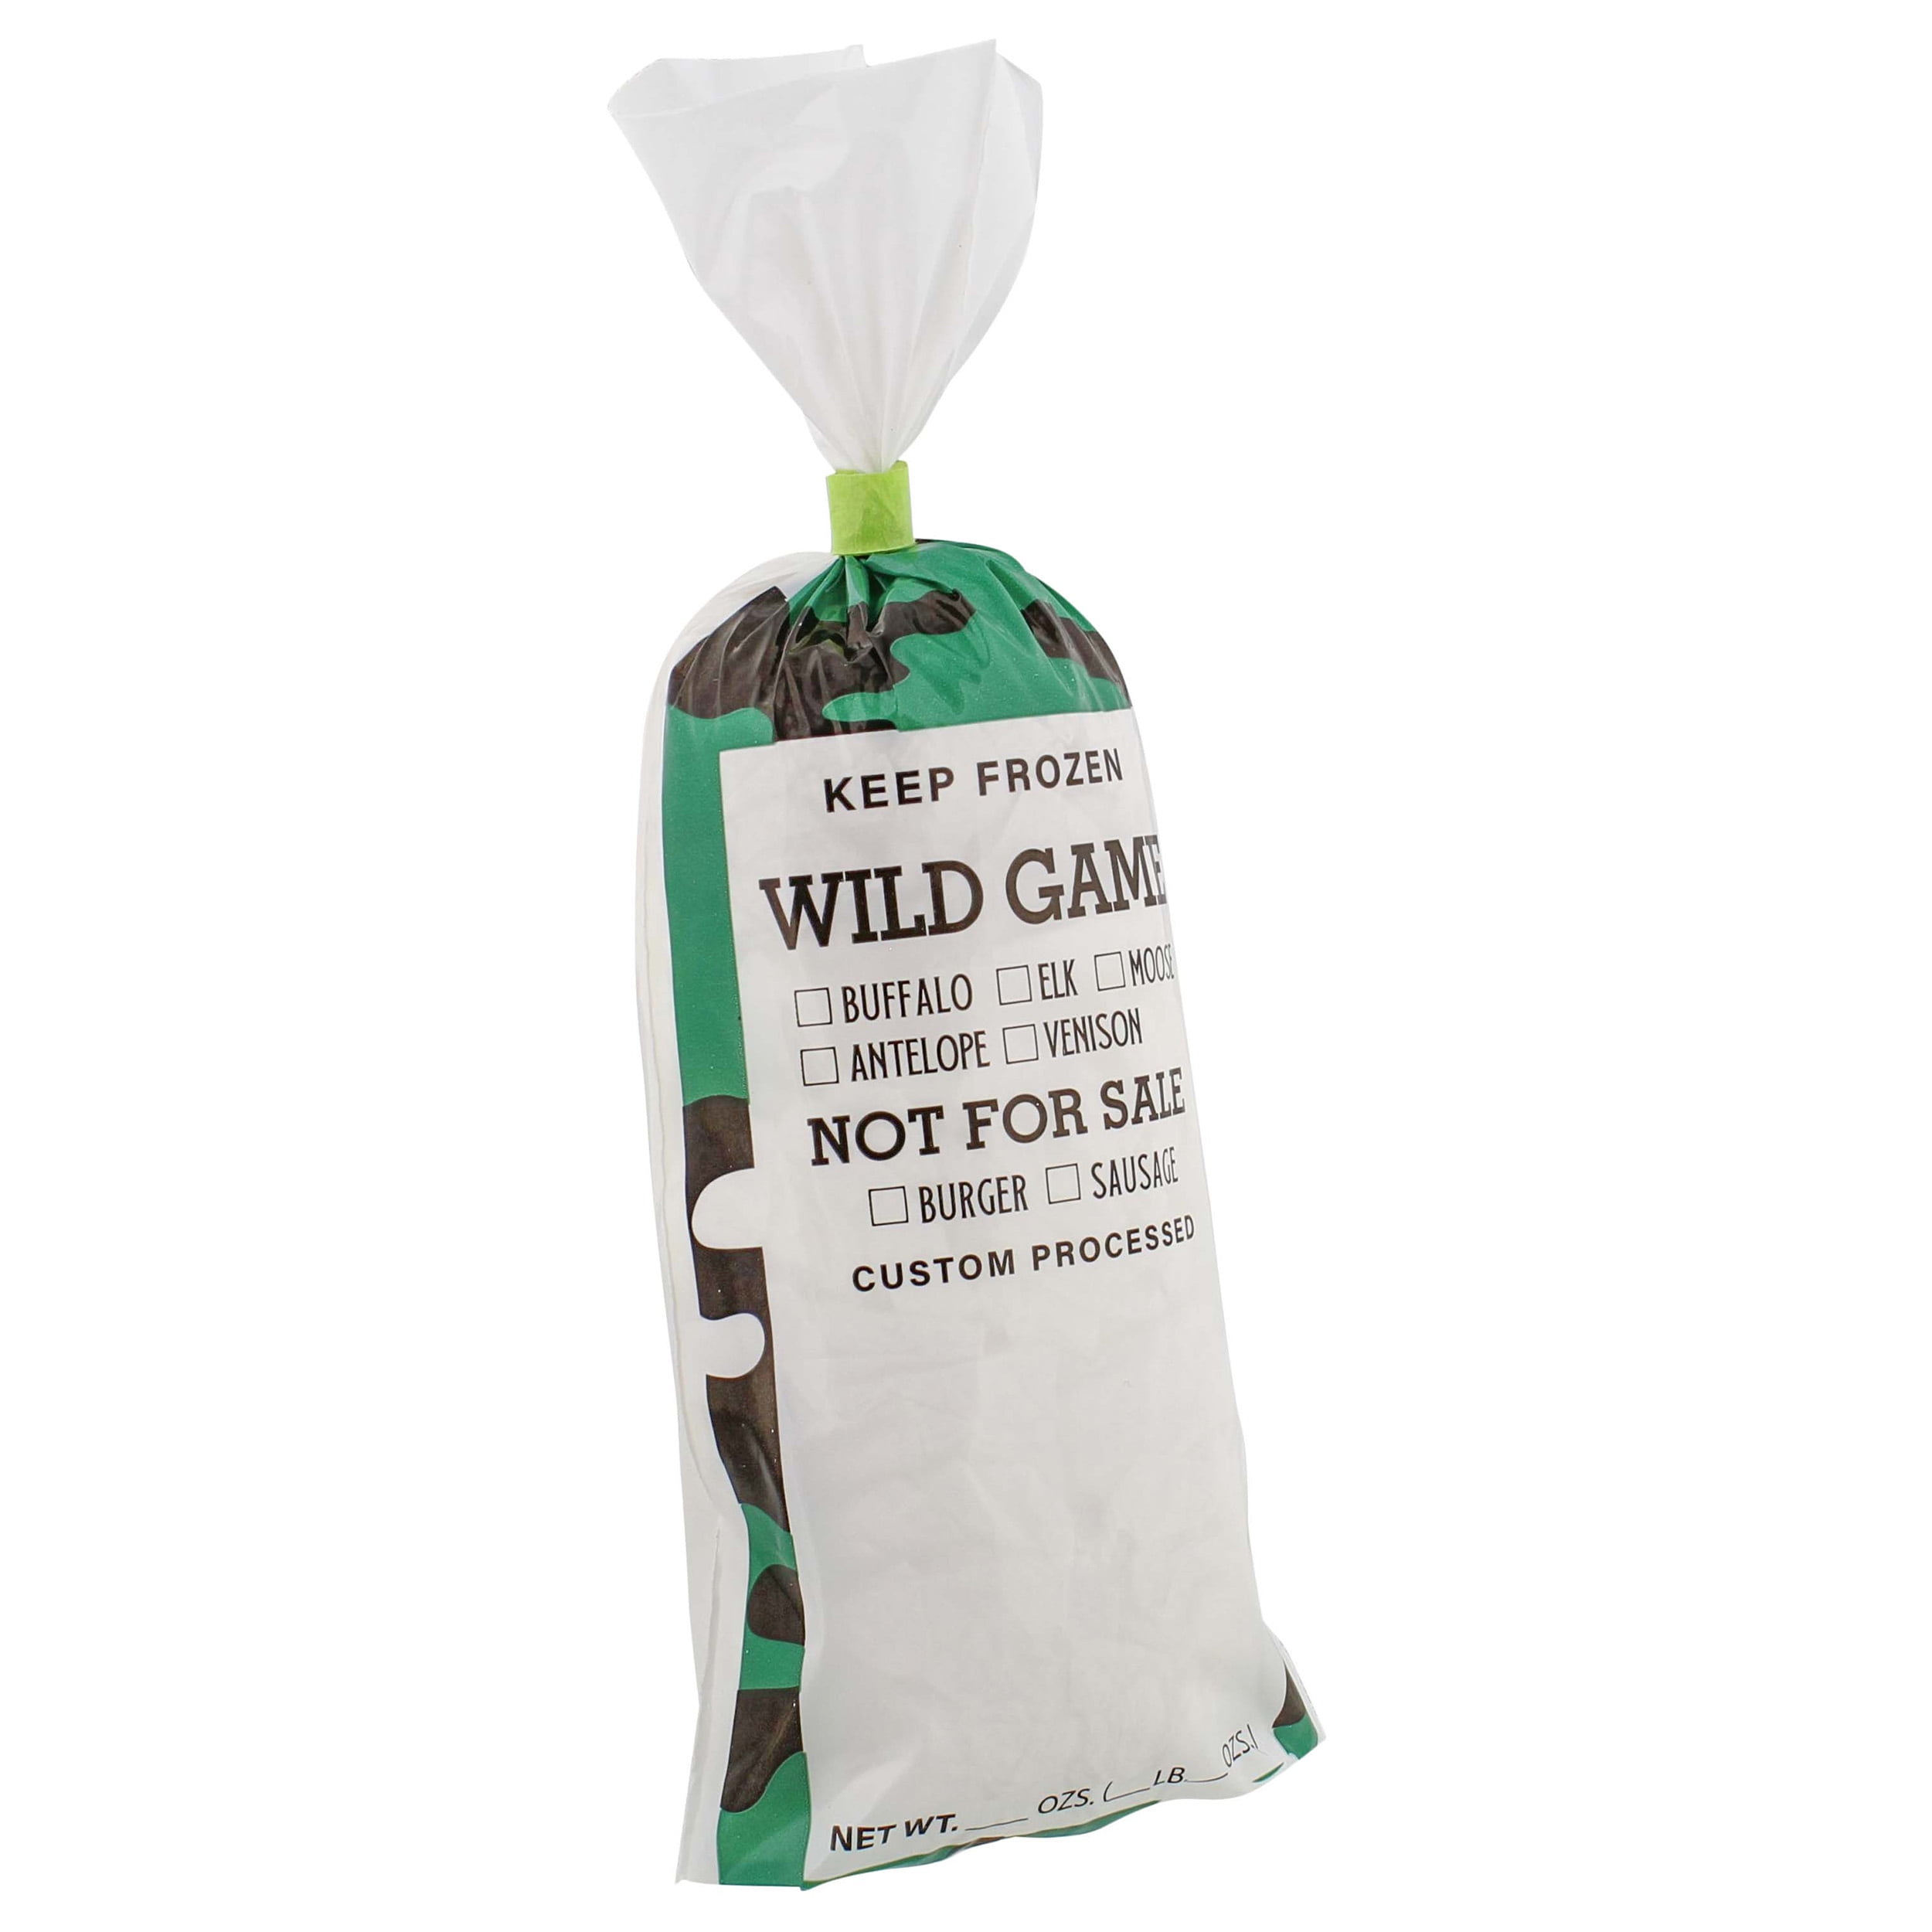 LEM Products Wild Game Meat Bags - 1lb # 040 - GameMasters Outdoors